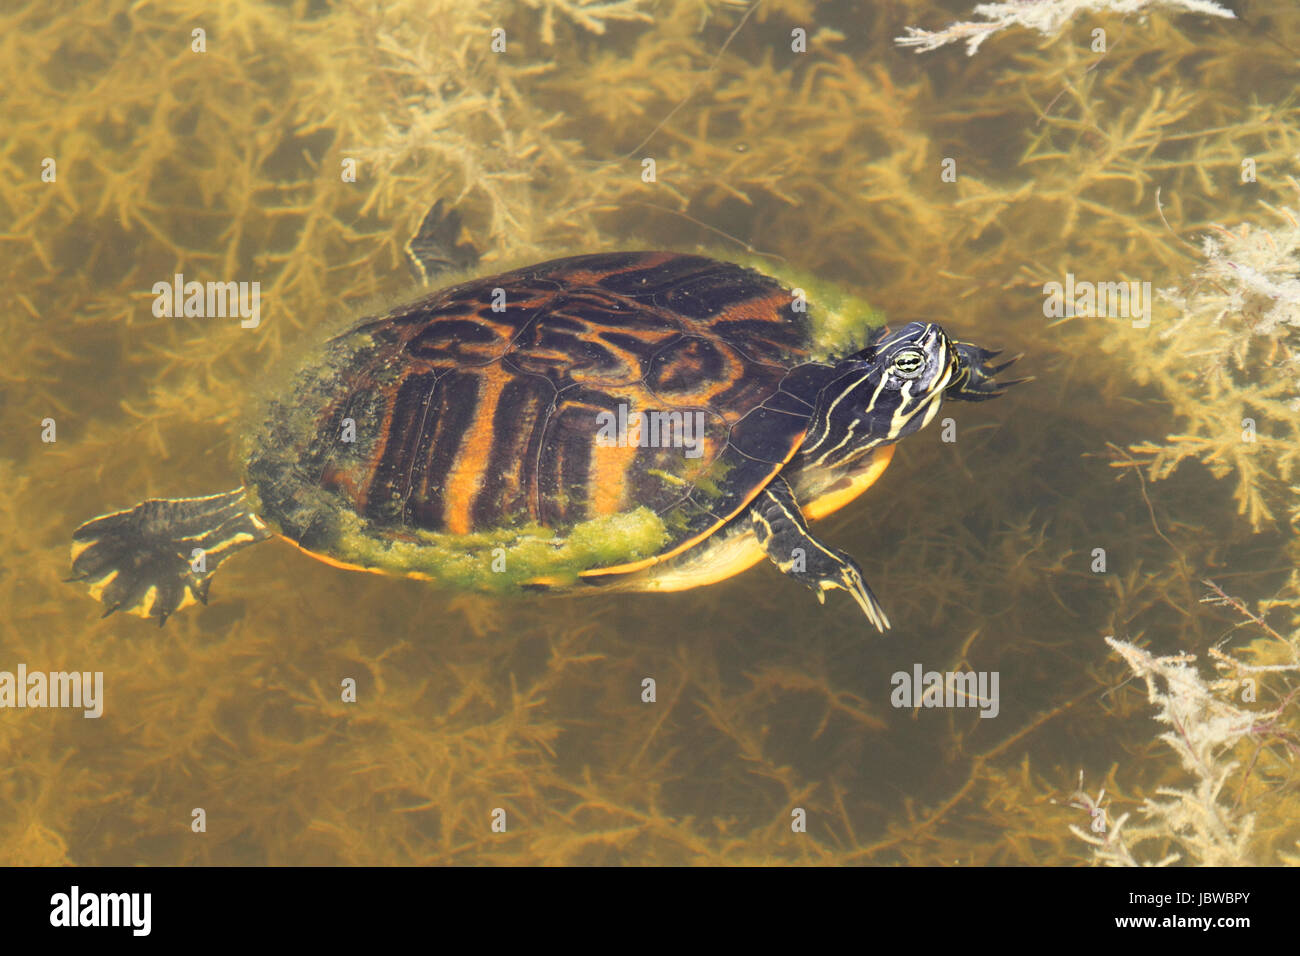 Florida Red-bellied Cooter (Pseudemys Chrysemys nelsoni) in the Florida Everglades Stock Photo